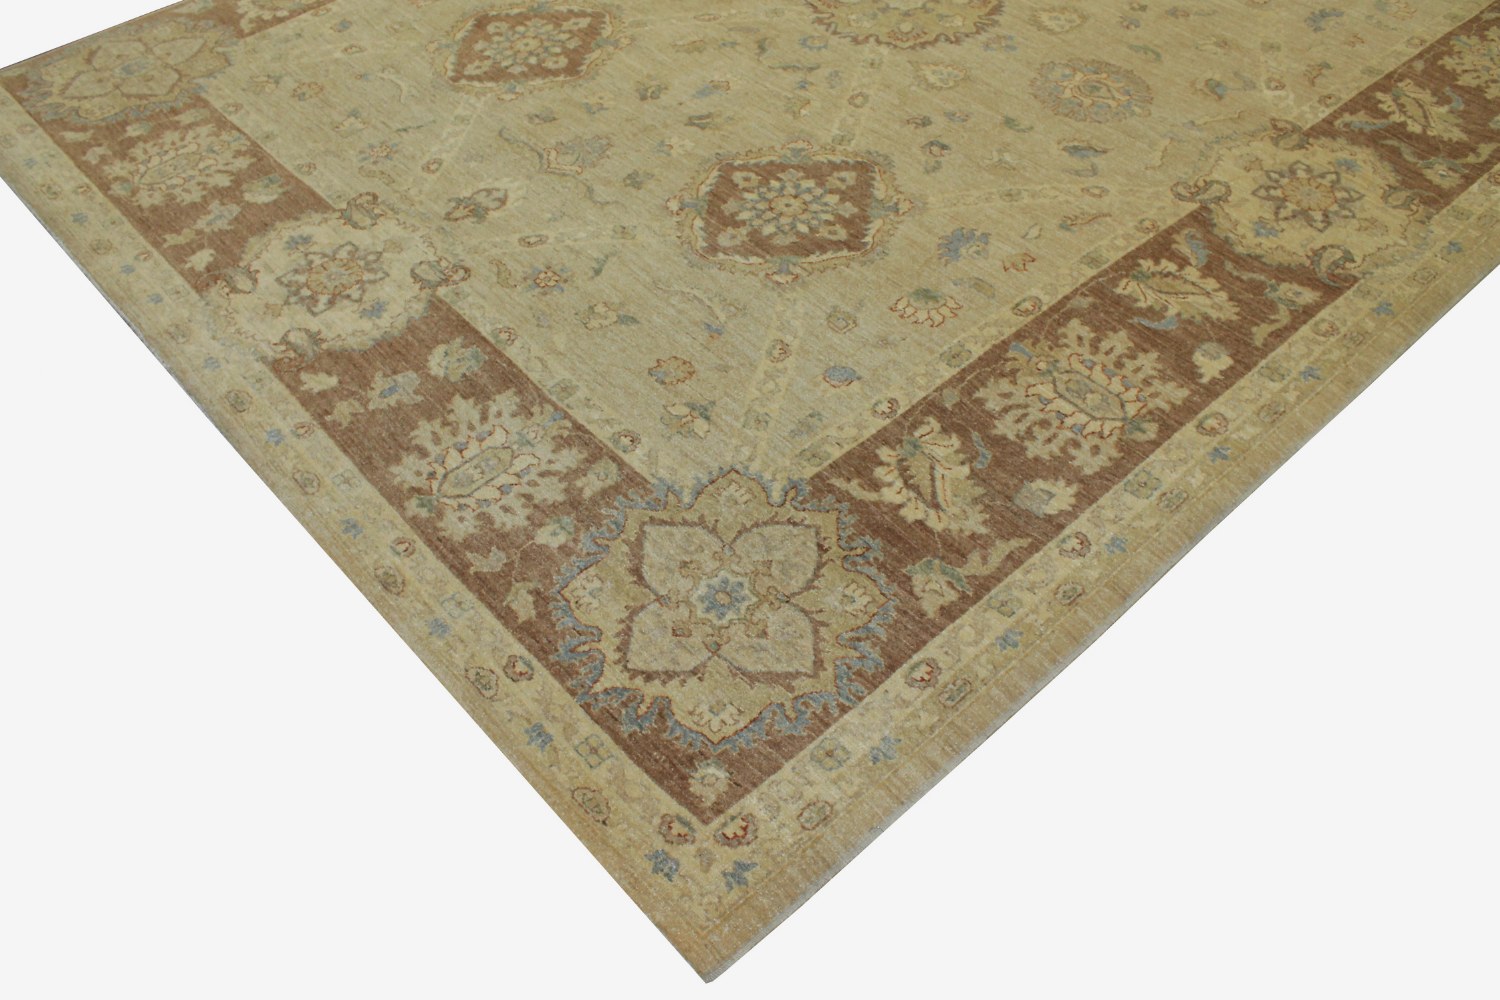 9x12 Peshawar Hand Knotted Wool Area Rug - MR11077